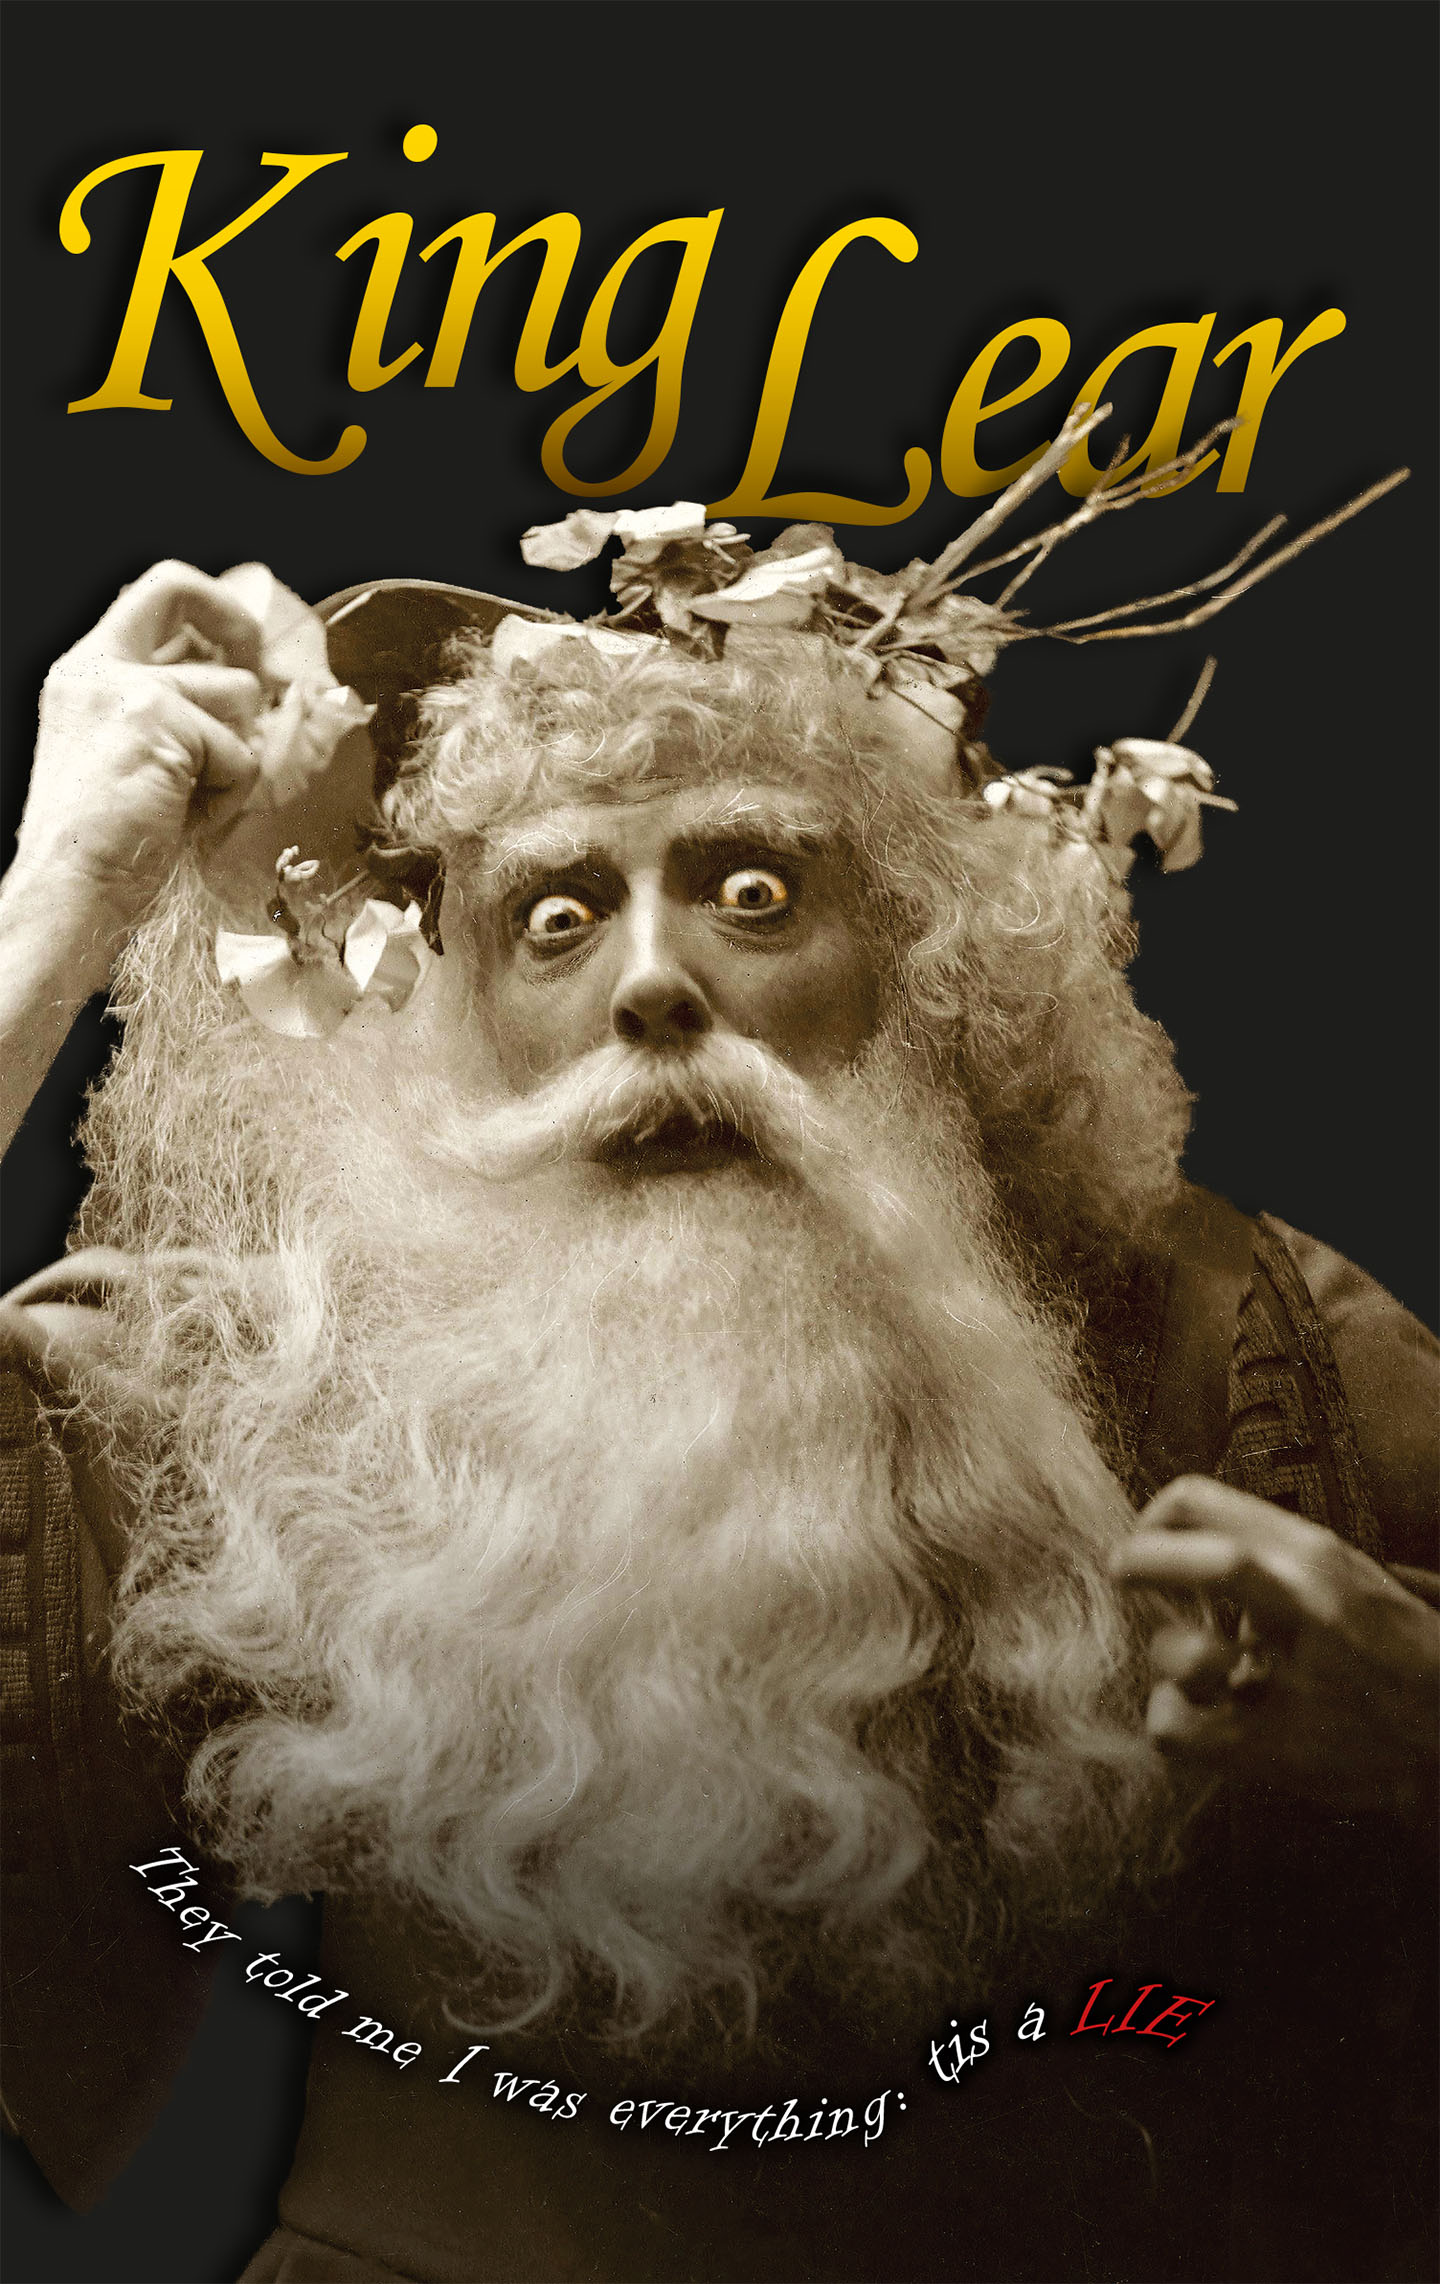 King Lear with a wide-eyed, mad expression on the front cover of the play. The title King Lear is in gold letters at the top of the page. text at the bottom says 'They told me I was everything, tis a lie'